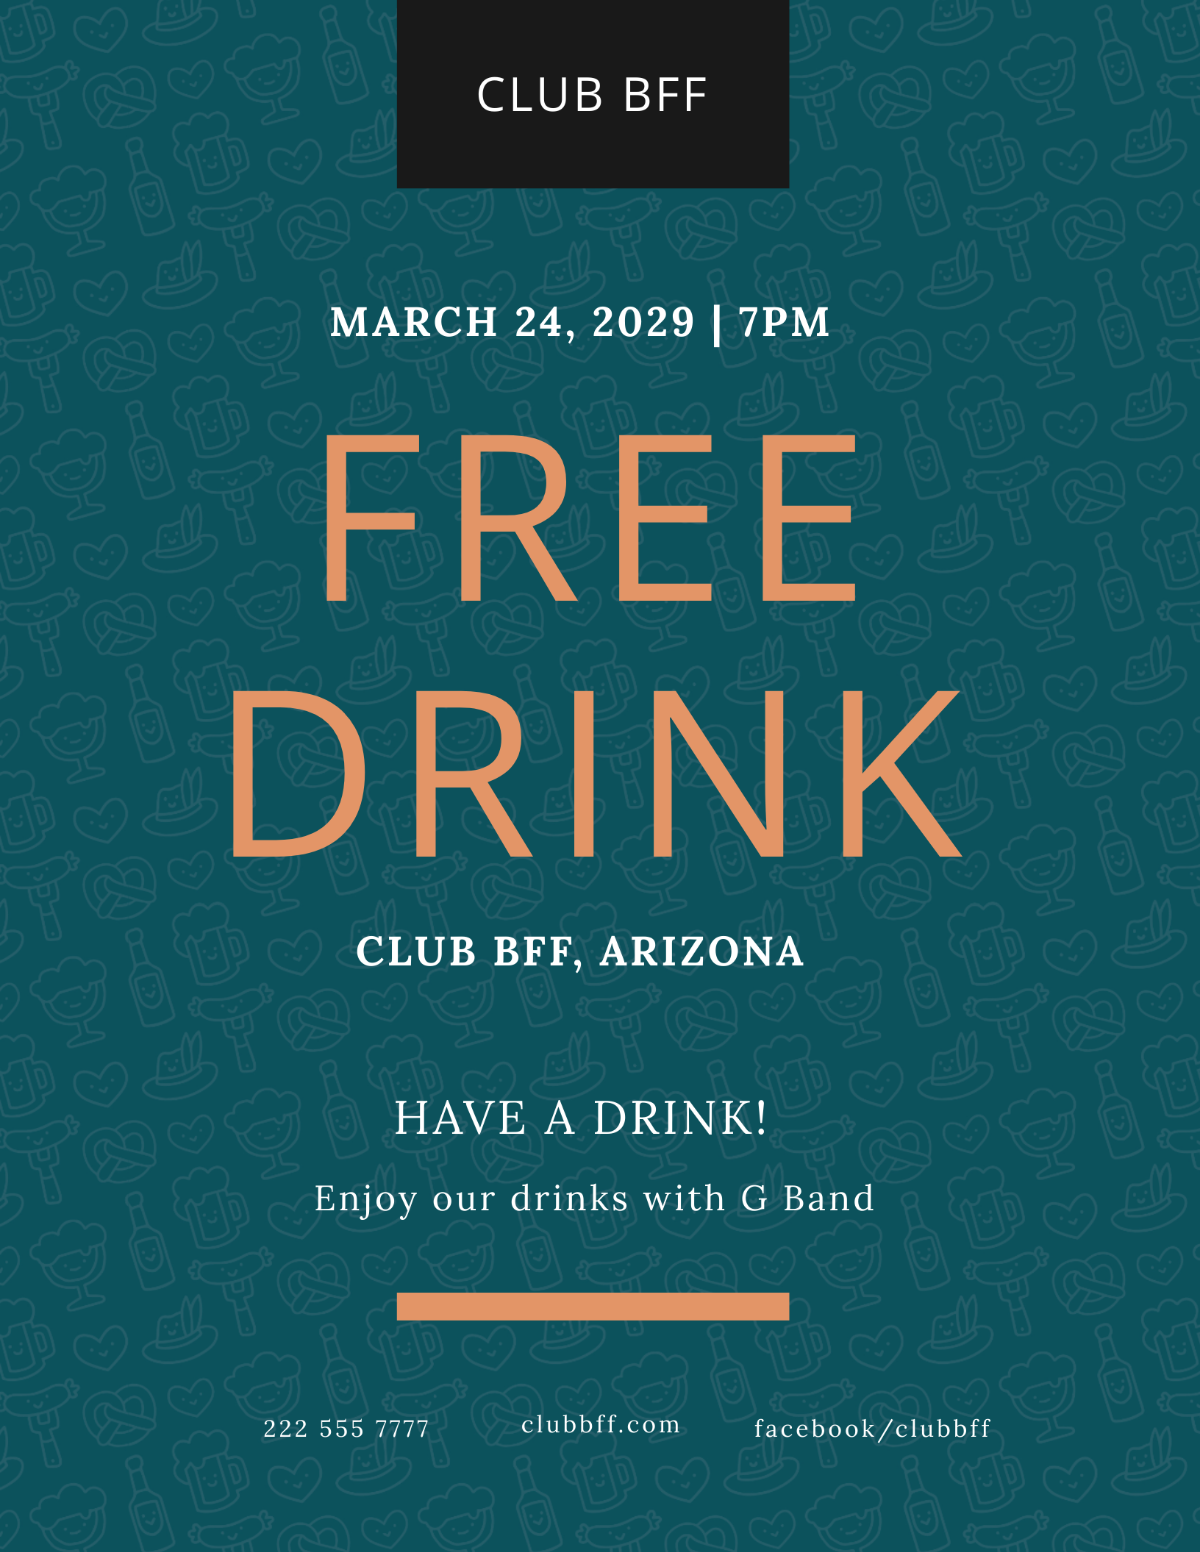 Drink Promotion Flyer Template